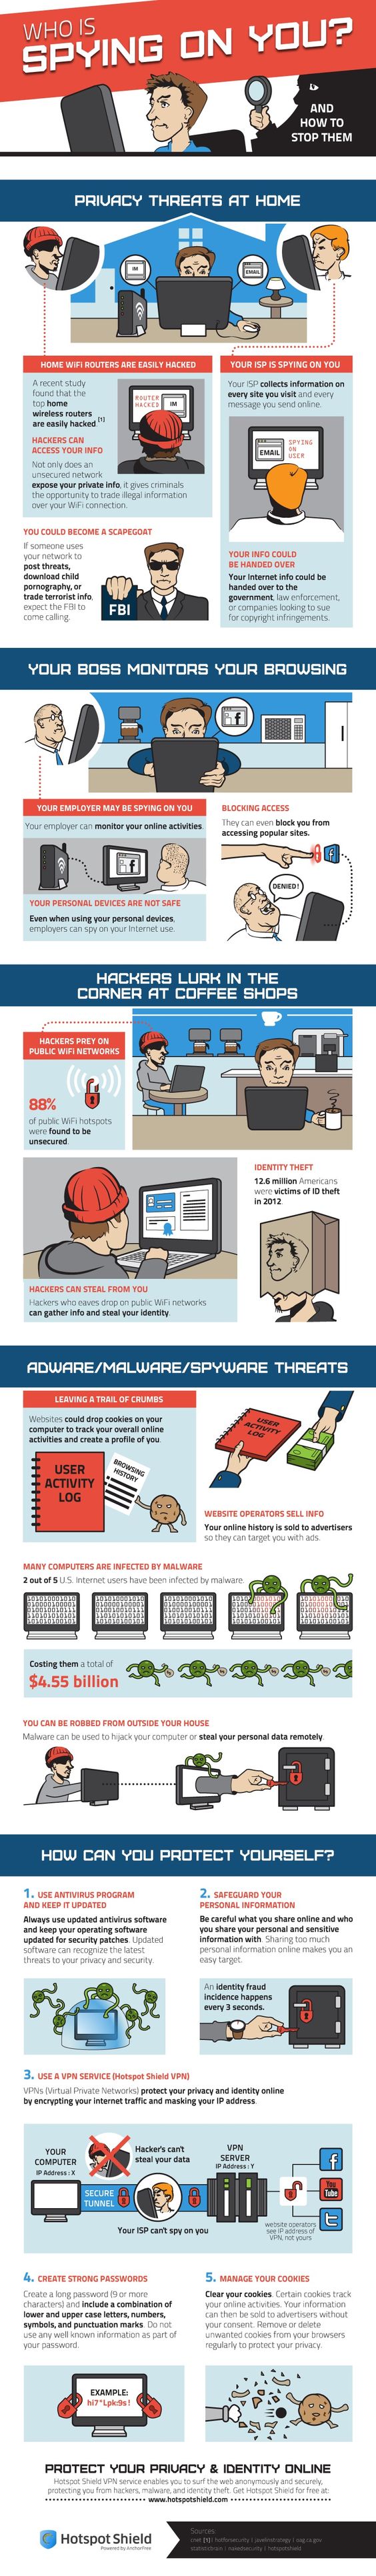 Top 10 Ways To Protect Yourself On Public Wi-Fi